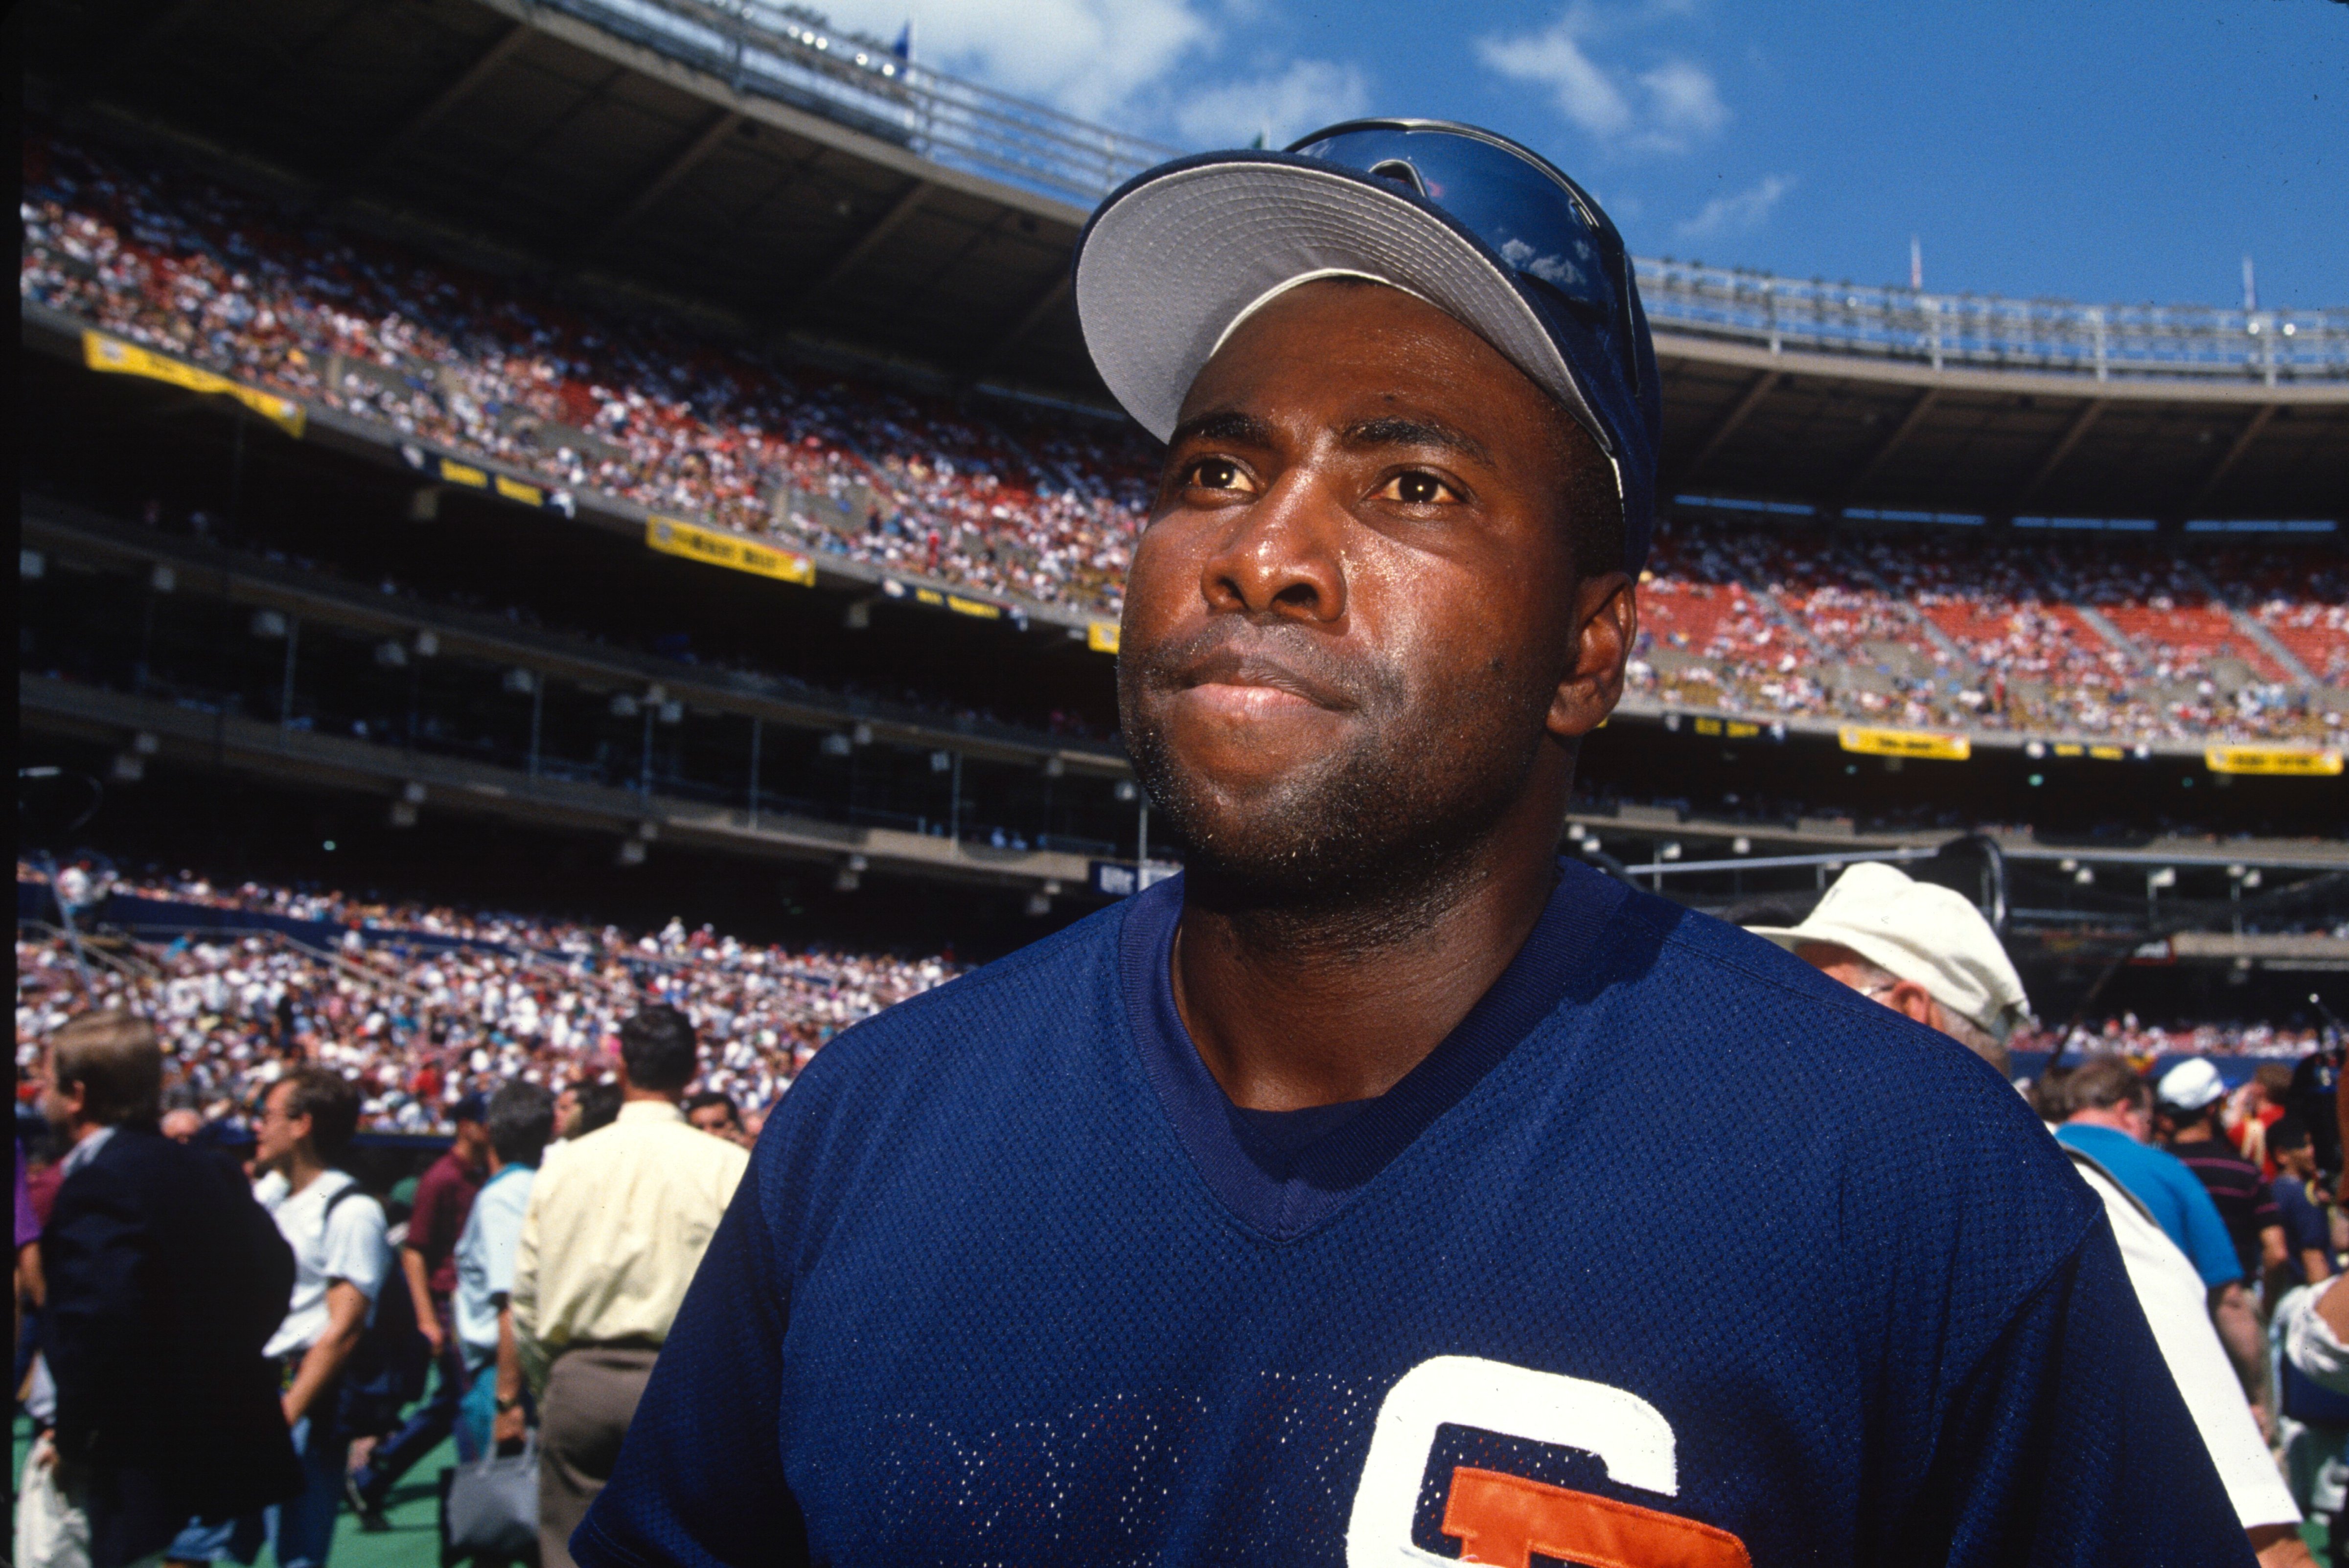 Tony Gwynn of the San Diego Padres during the 65th MLB All-Star game against the American League at Three Rivers Stadium on Tuesday, July 12, 1994 in Pittsburgh, Pennsylvania. (Rich Pilling—MLB Photos/Getty Images)